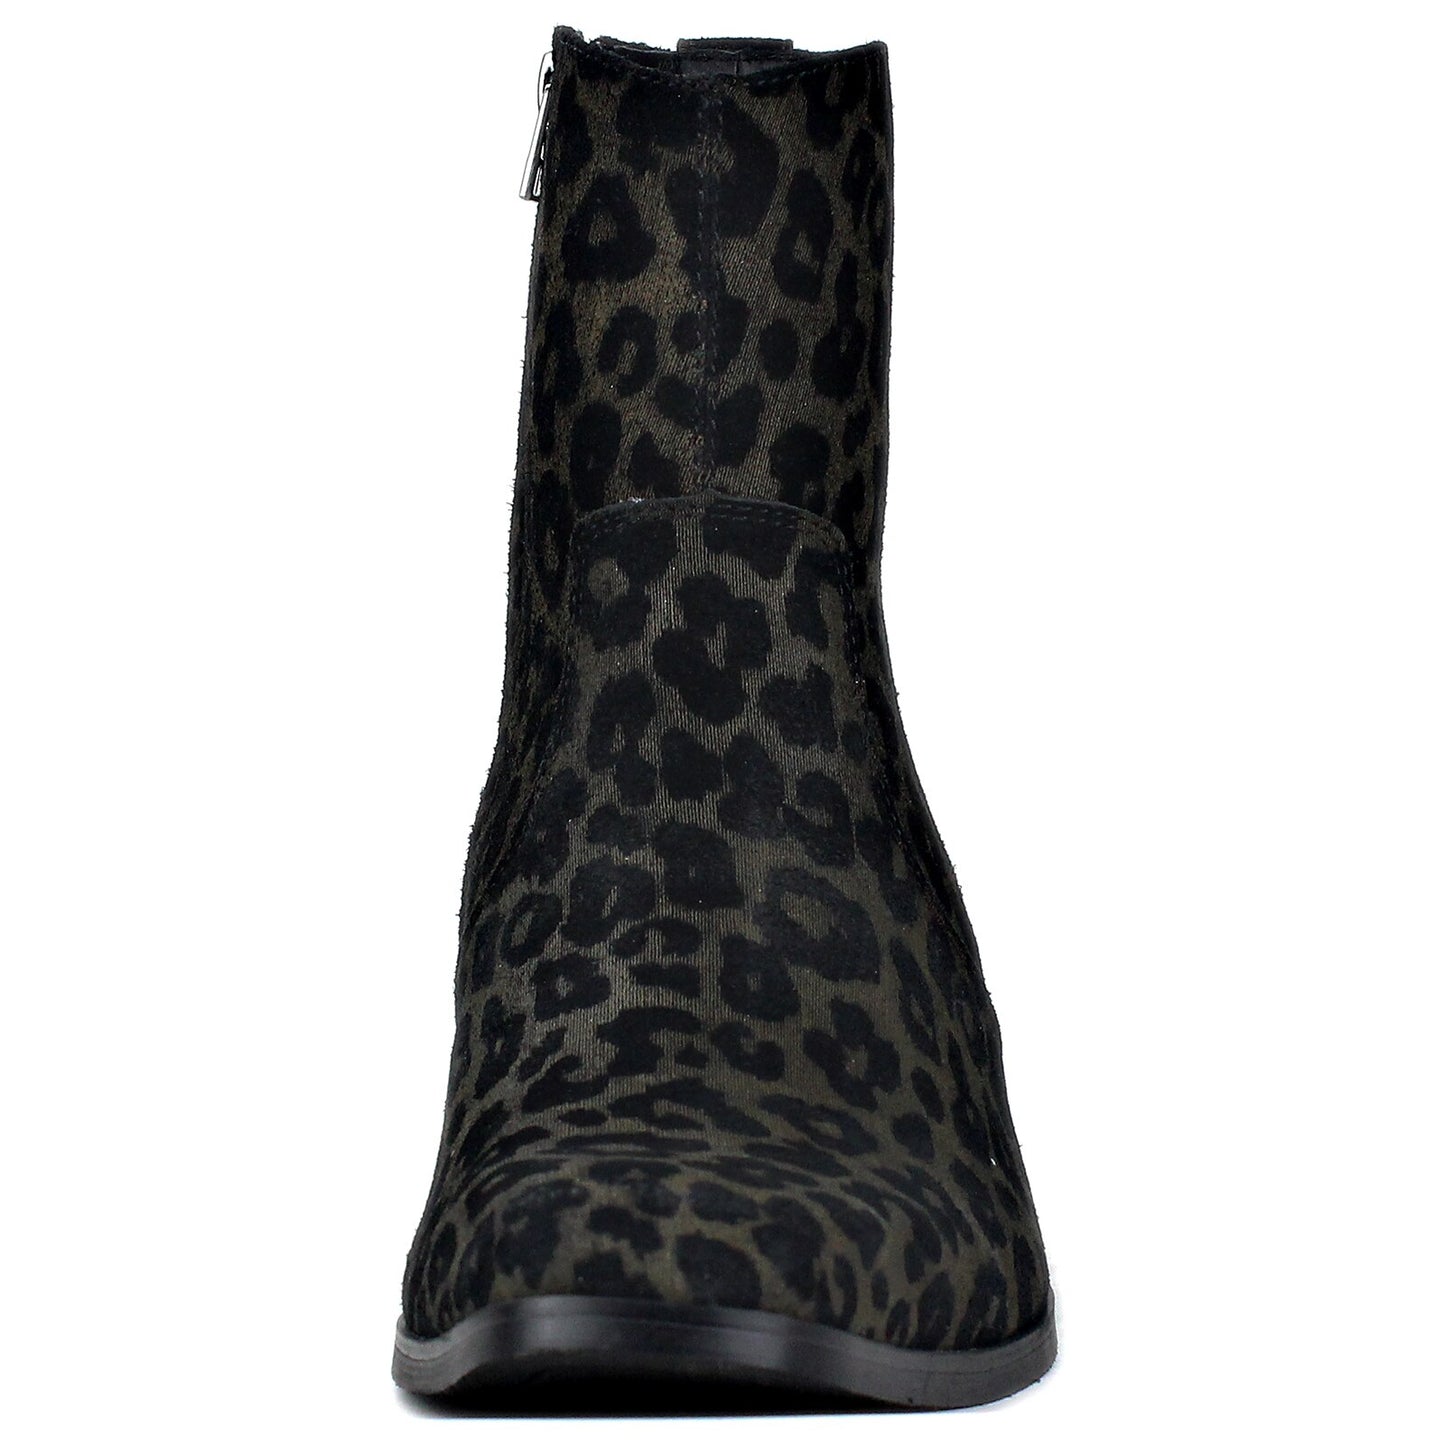 Stile Genuine Leather Leopard Boots